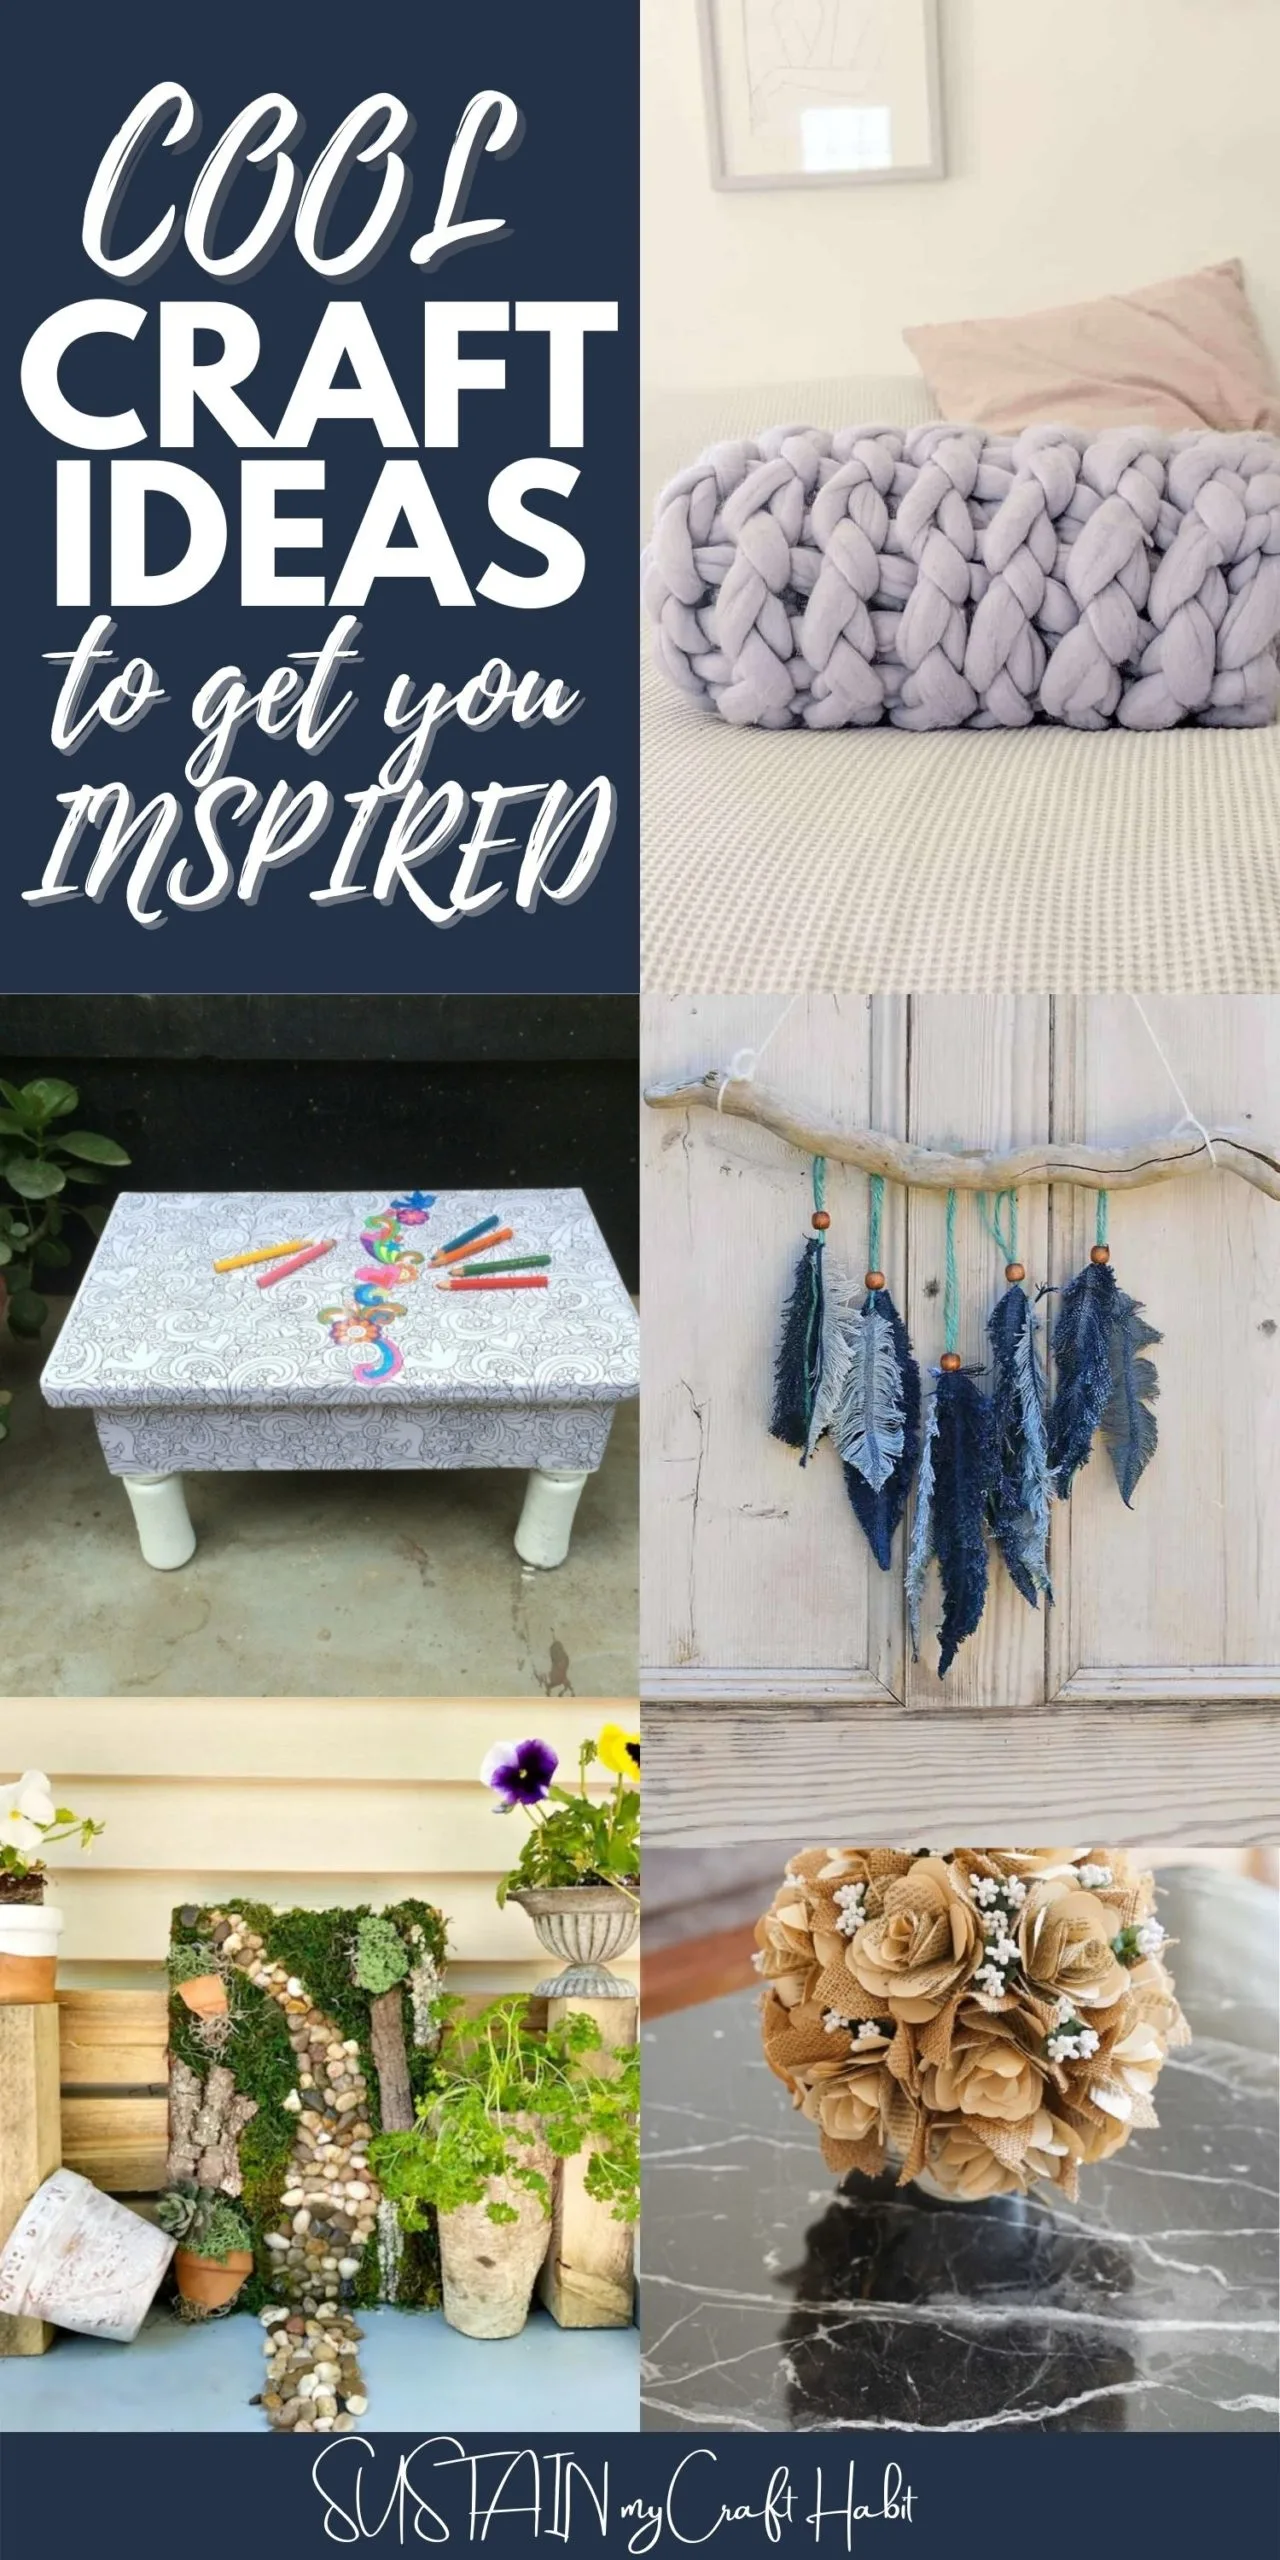 Collage of images with text overlay reading "Cool craft ideas to get you inspired".